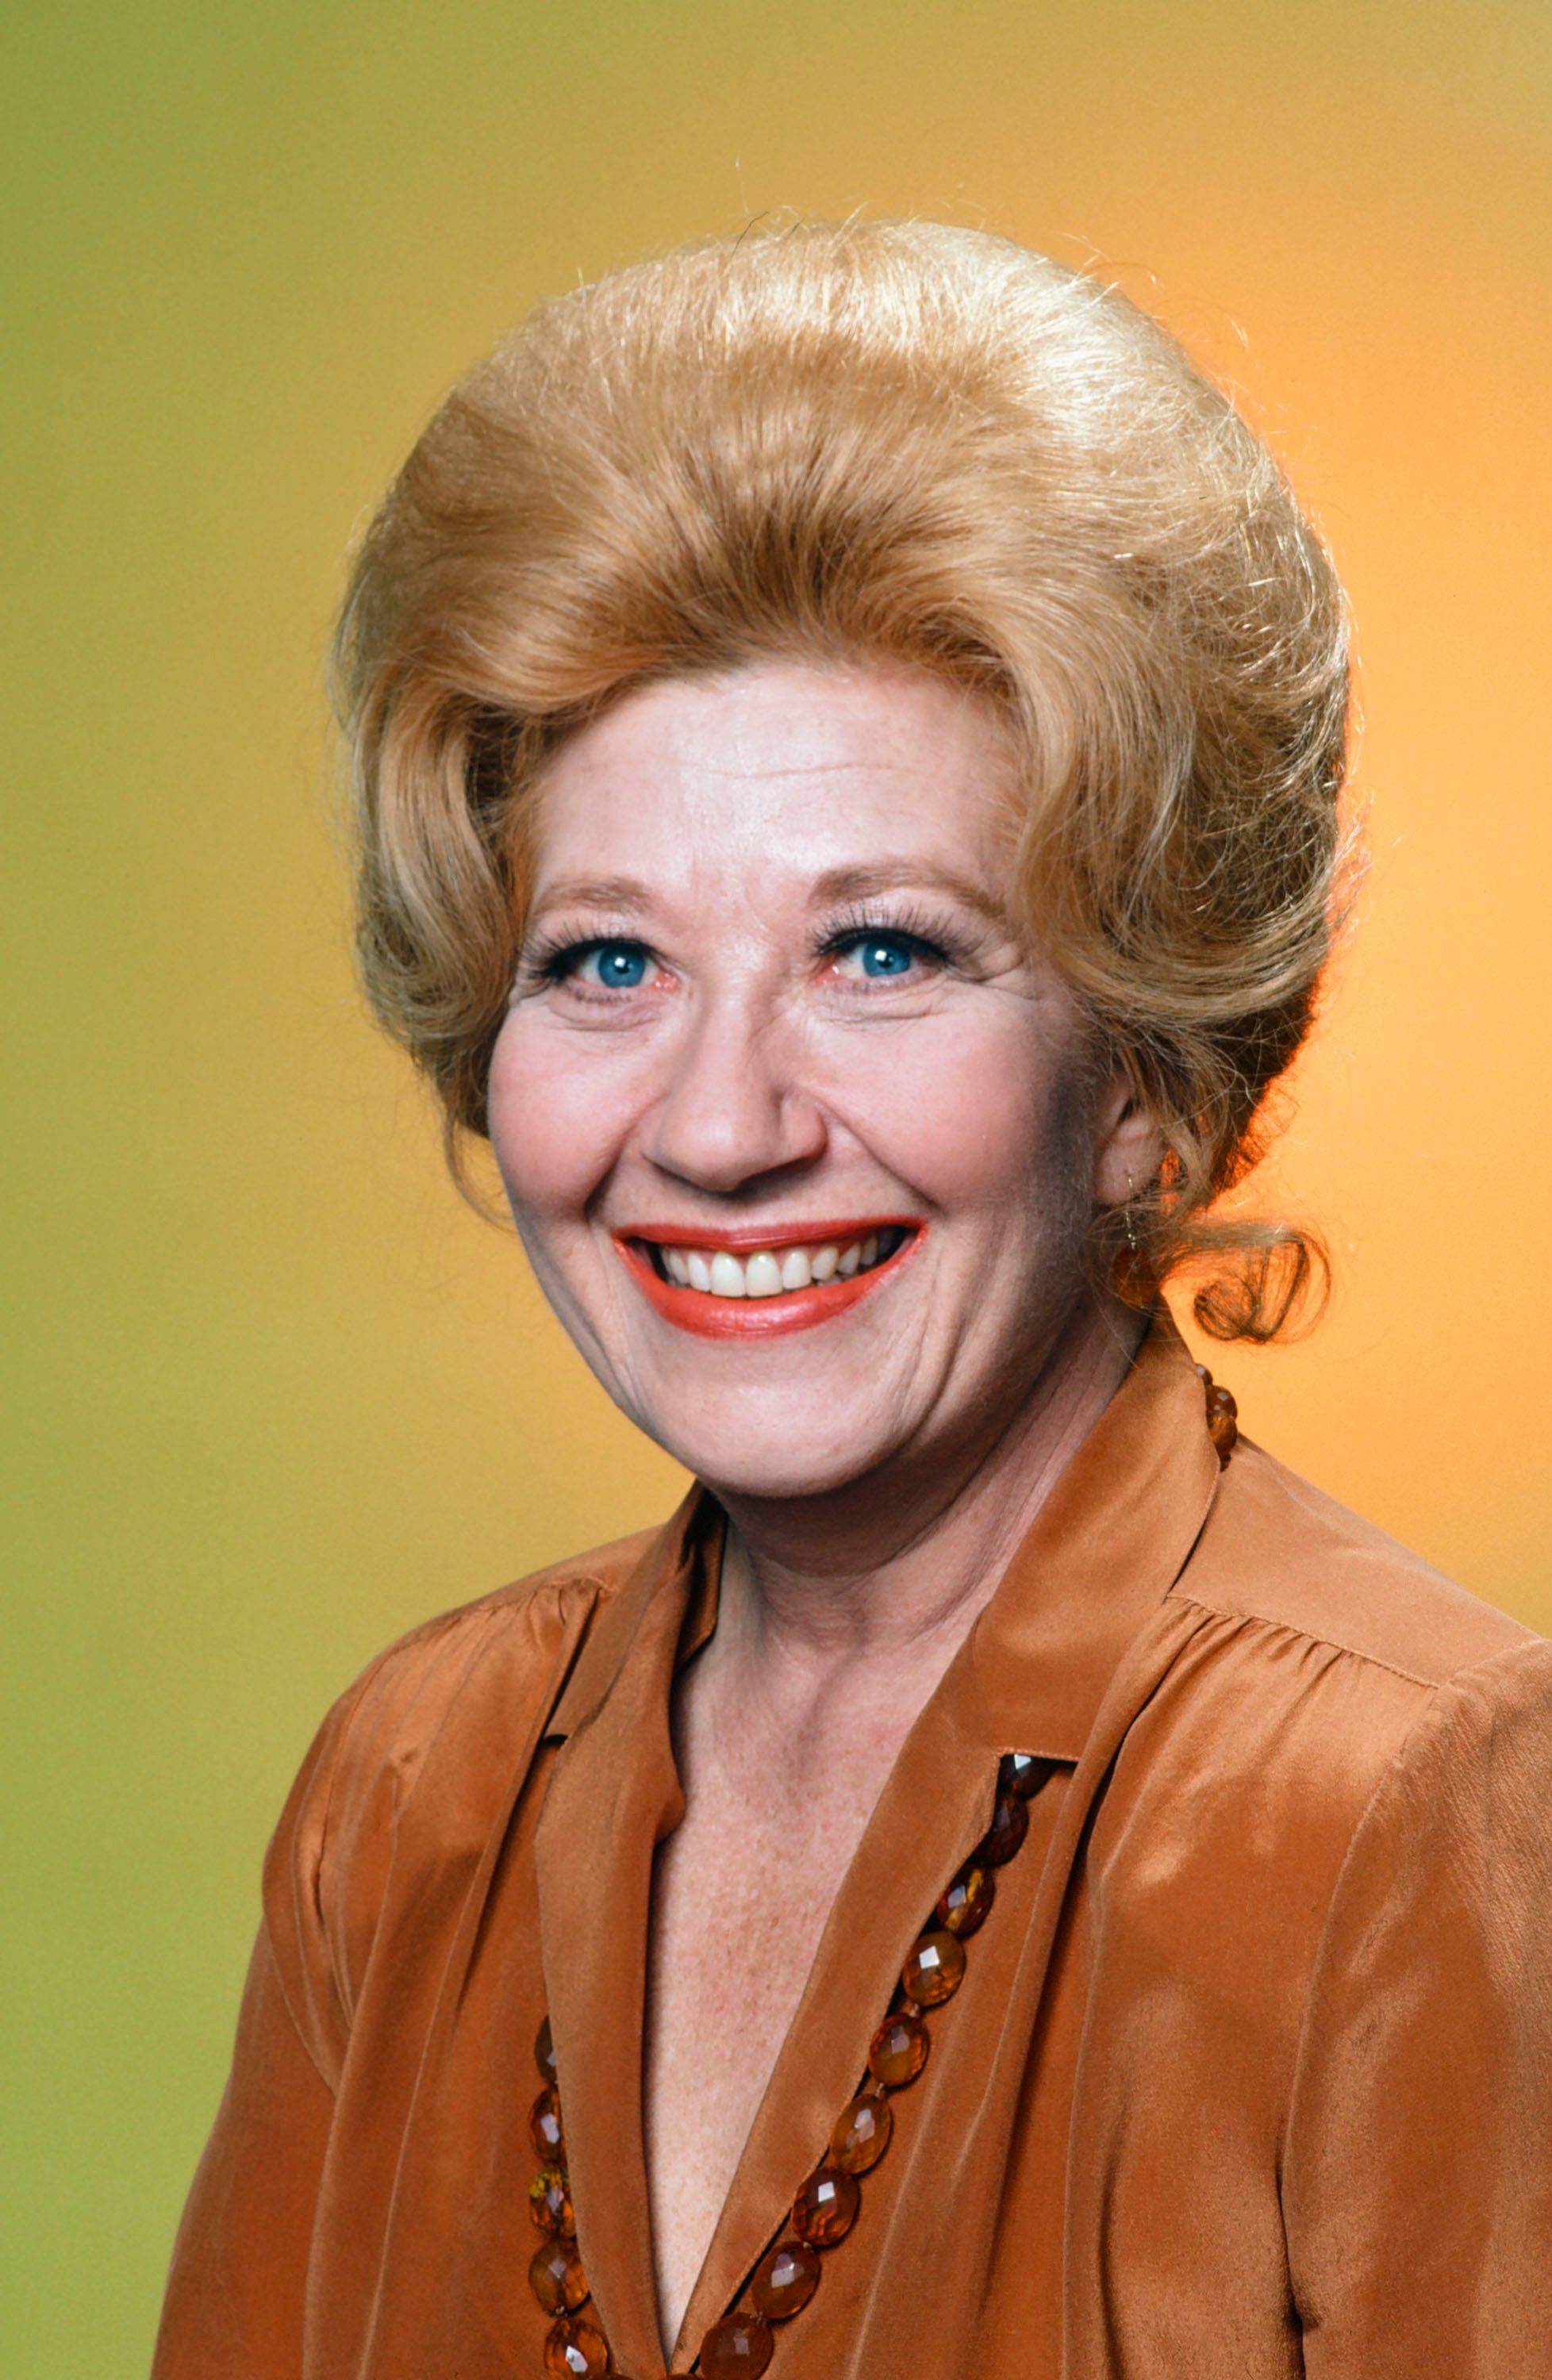 Charlotte Rae as Edna Garrett in "The Facts of Life," Season 1. | Source: Getty Images